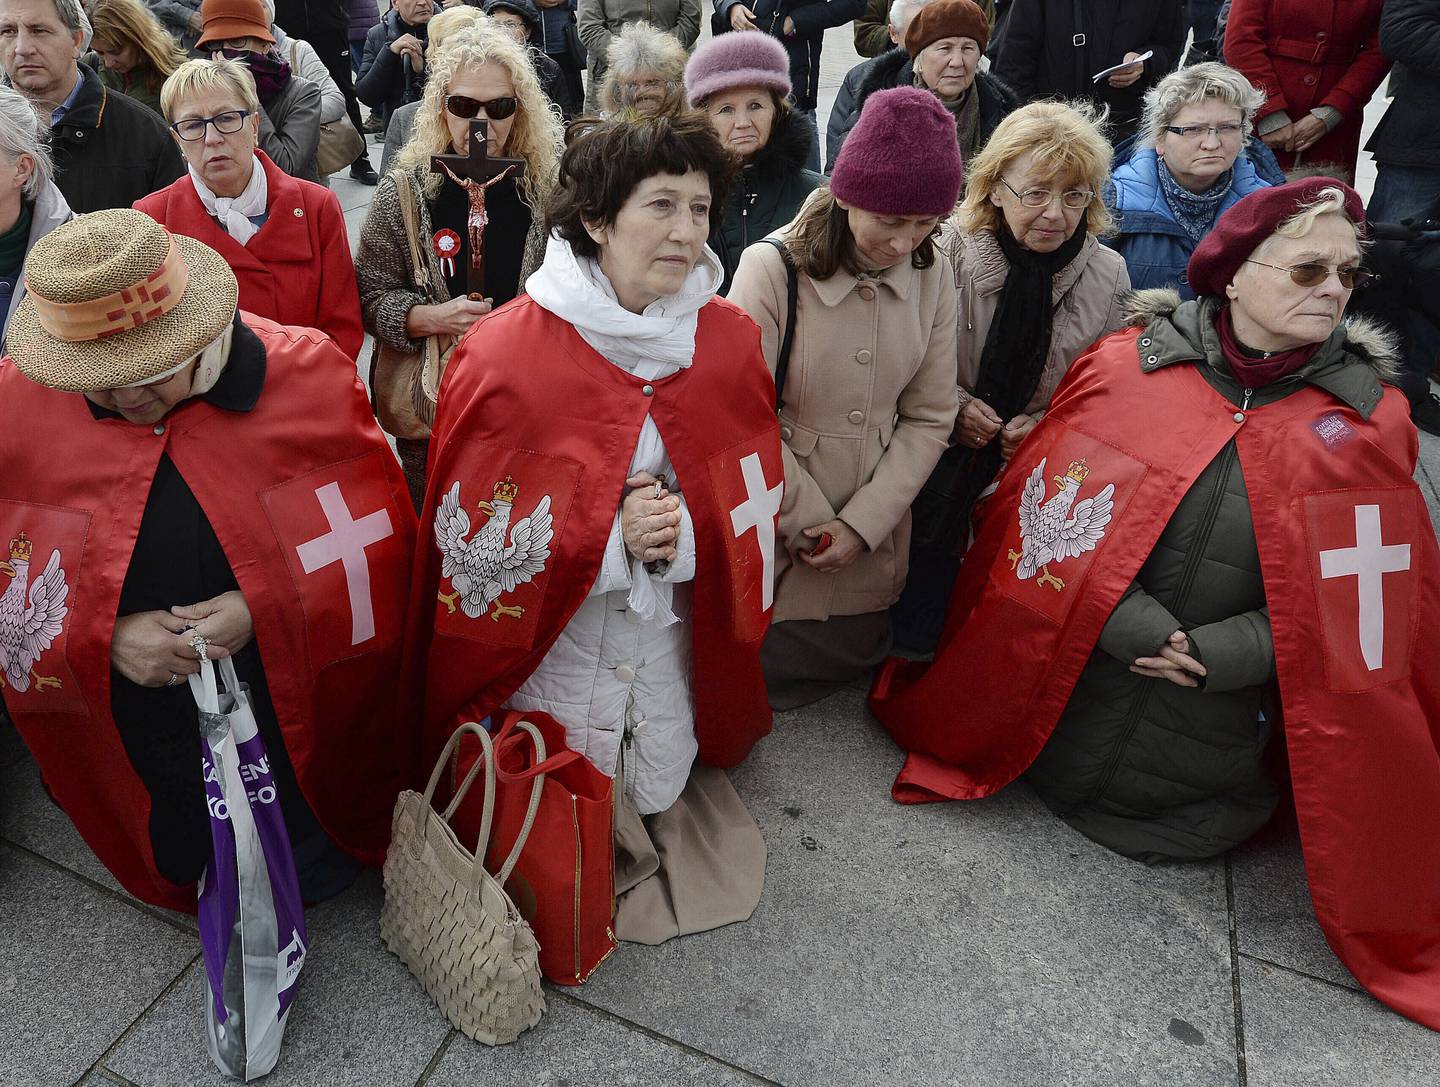 In this Oct. 5, 2019, photo, Polish Catholics pray at an anti-gay event in Warsaw, Poland. About 200 people marched holding rosaries and crucifixes and praying to apologize for what they say is the desecration of pride parades. (AP Photo/Czarek Sokolowski)